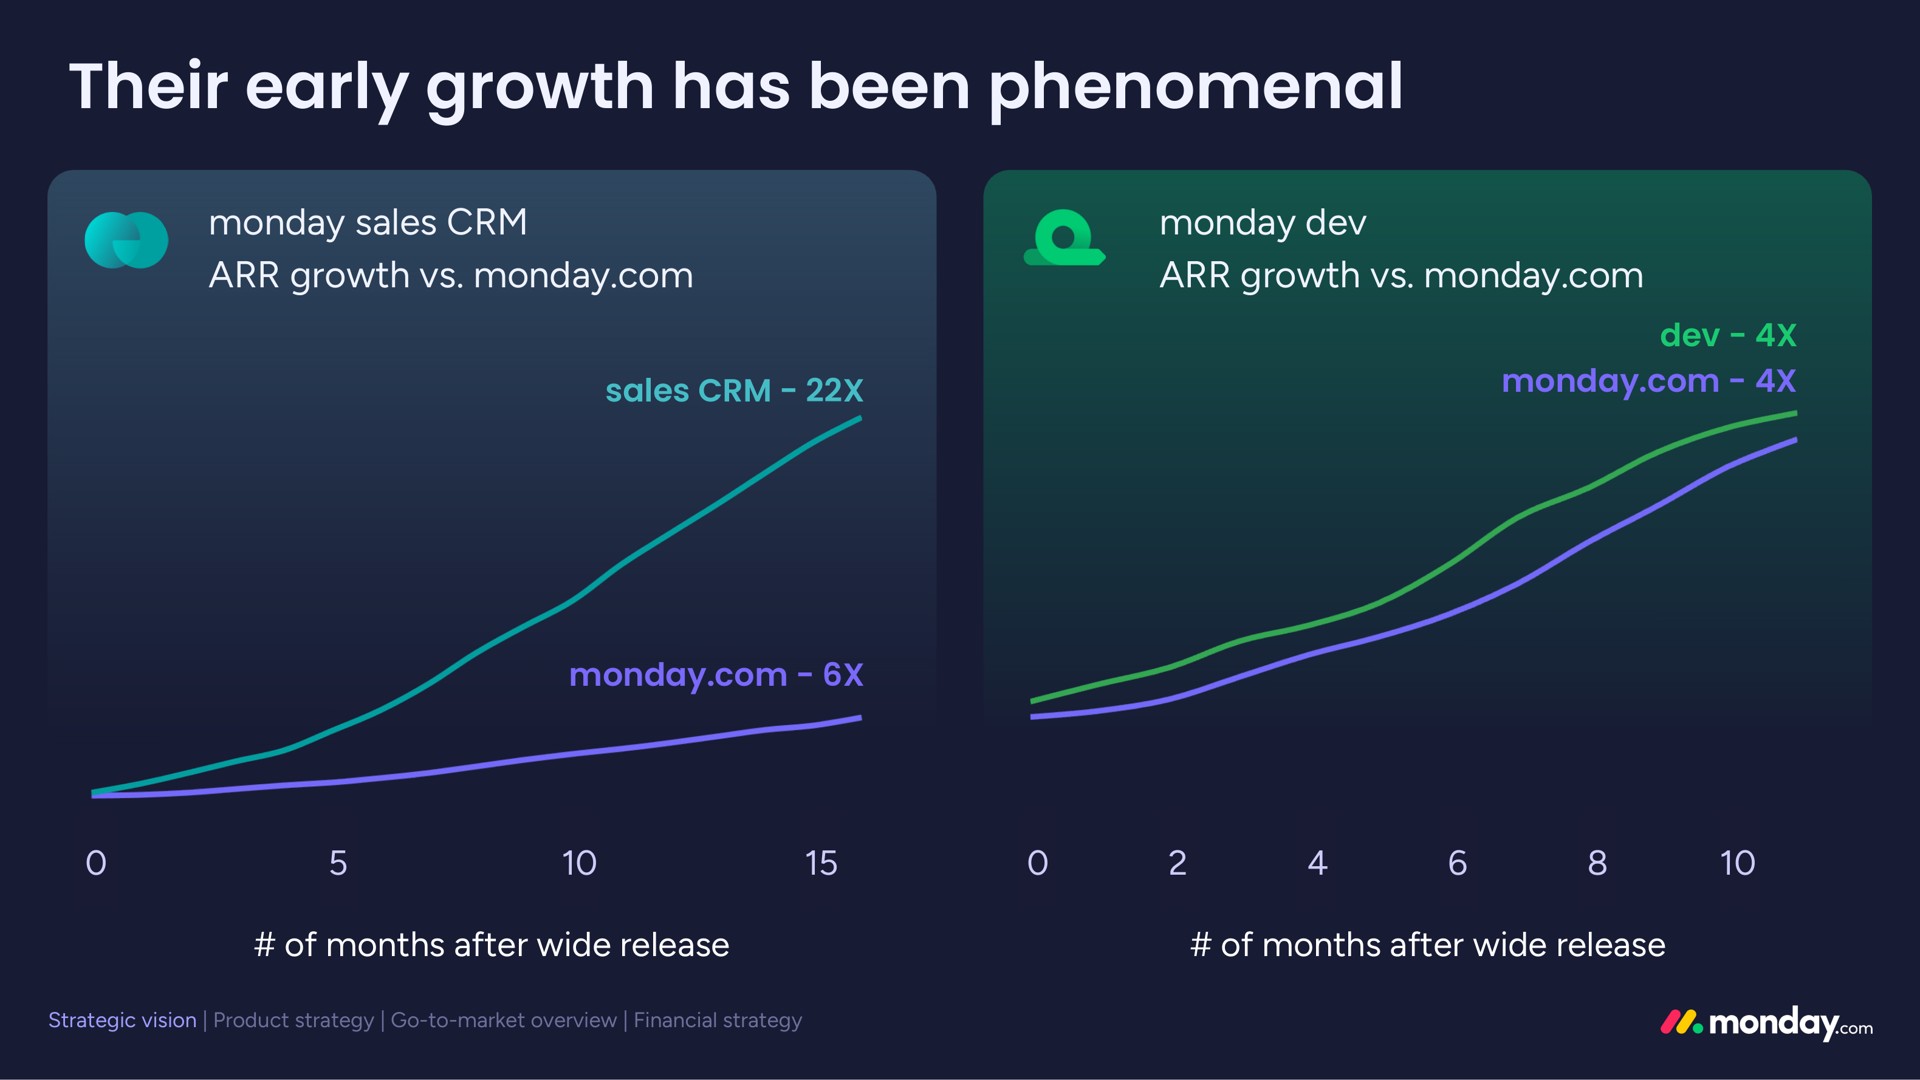 their early growth has been phenomenal | monday.com